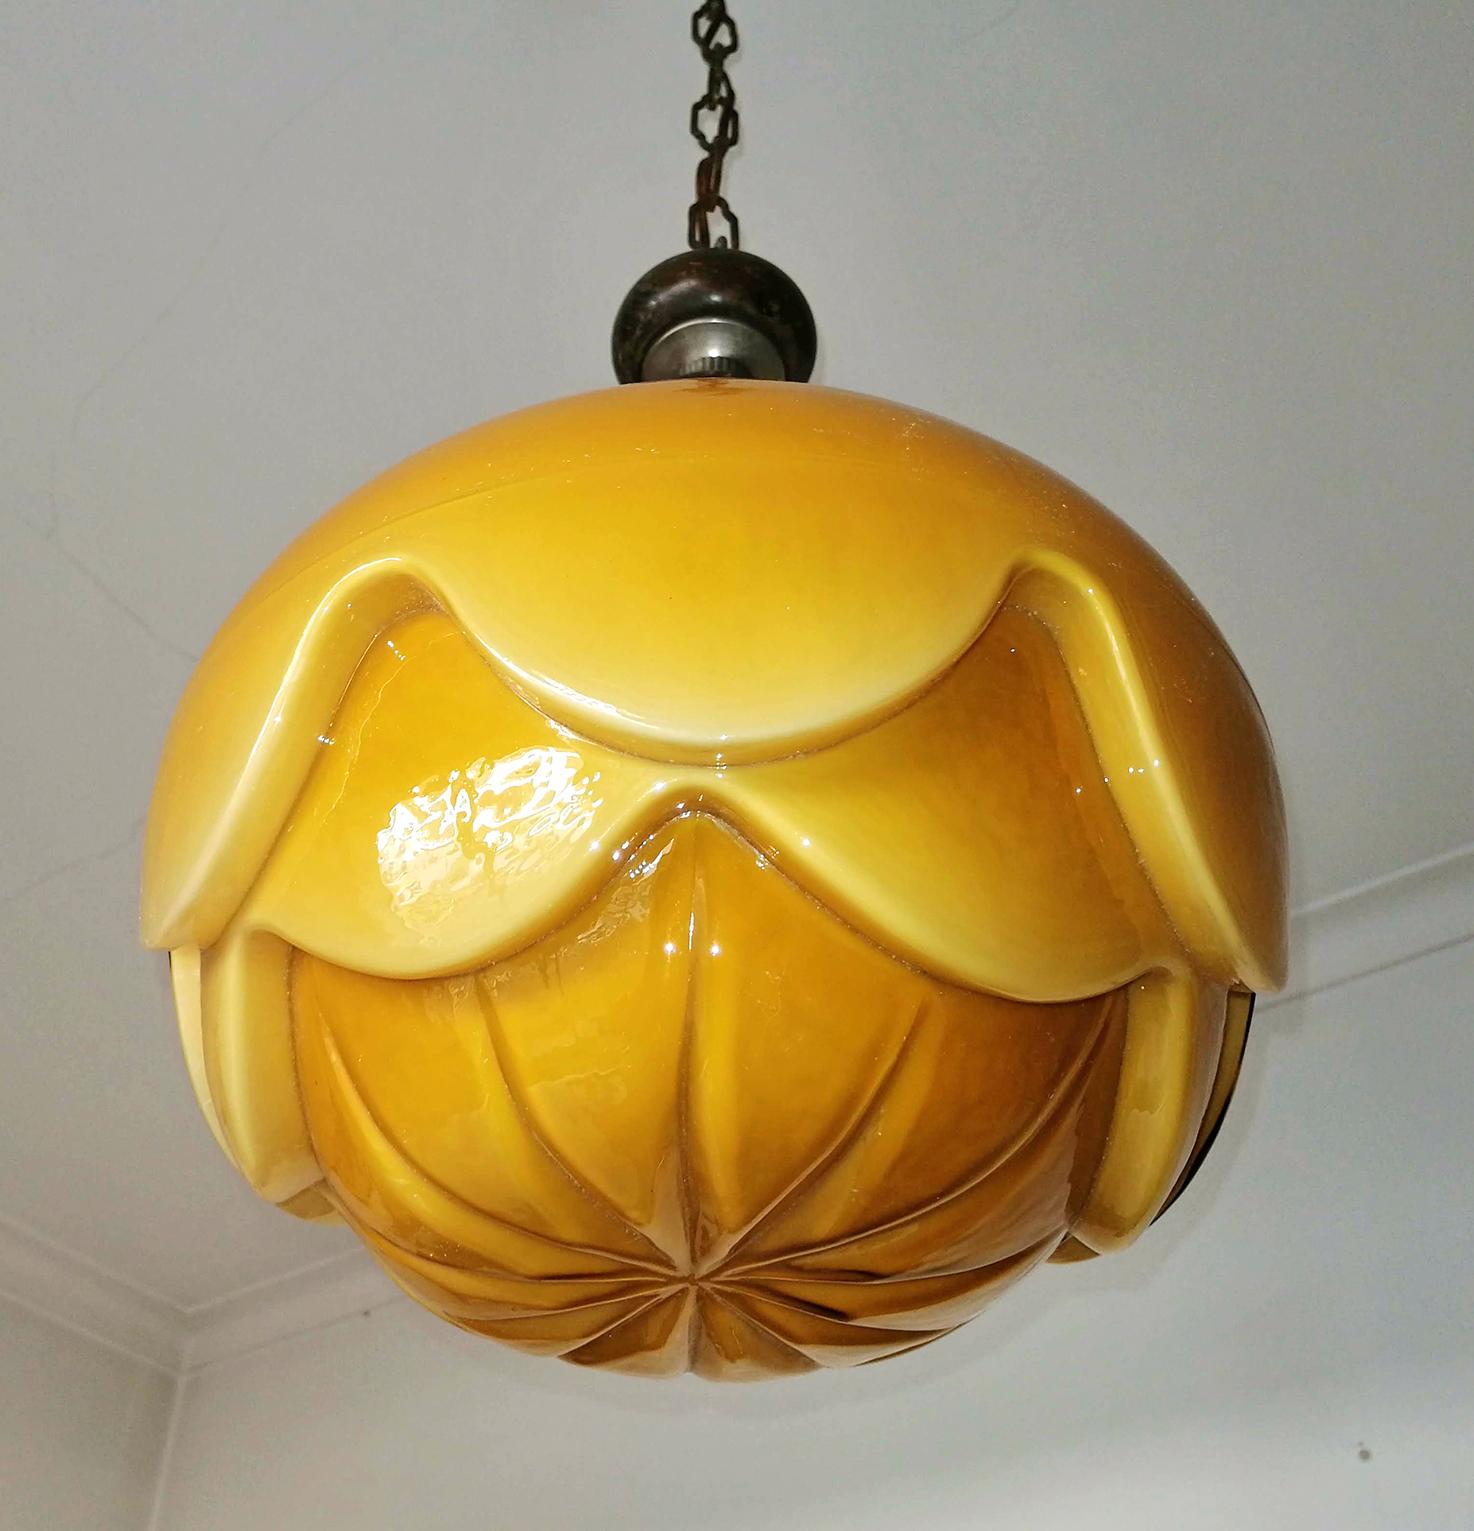 Fabulous Bauhaus French Art Deco with gorgeous opaline cased amber glass shade pendant chandelier.
Measures:
Diameter: 11,8 in/ 30 cm
Height: 39.3 in/ 100 cm (chain= 45 cm)
Weight: 15 lb/ 7 Kg
1 light bulbs E27/ good working condition
Assembly